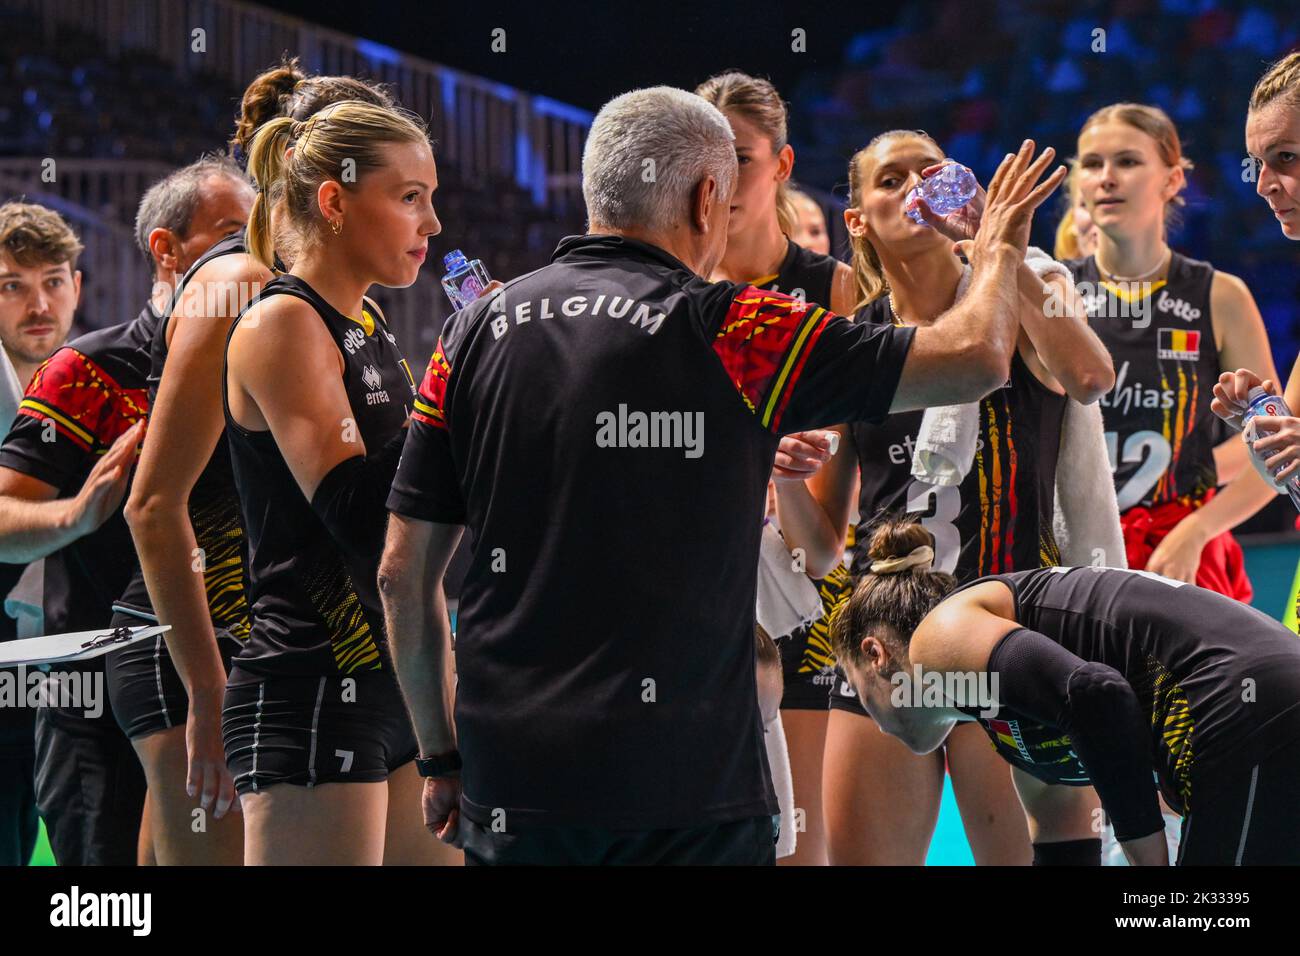 Belgium's head coach Gert Vande Broek talks to his players during a  volleyball game between Belgian national women's team the Yellow Tigers and  Puerto Rico, Saturday 24 September 2022 in Arnhem during